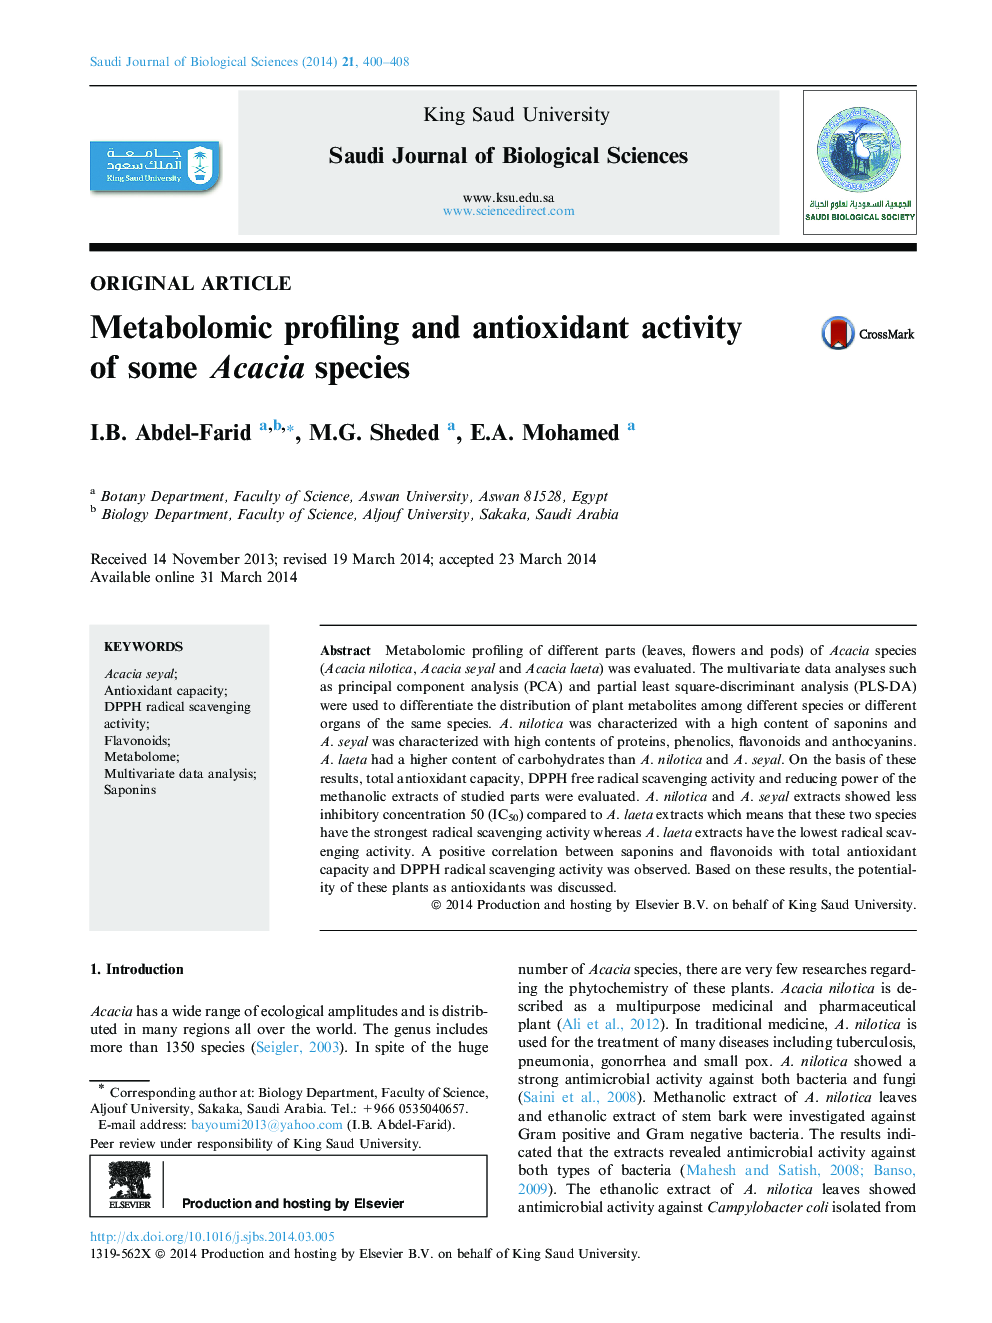 Metabolomic profiling and antioxidant activity of some Acacia species 